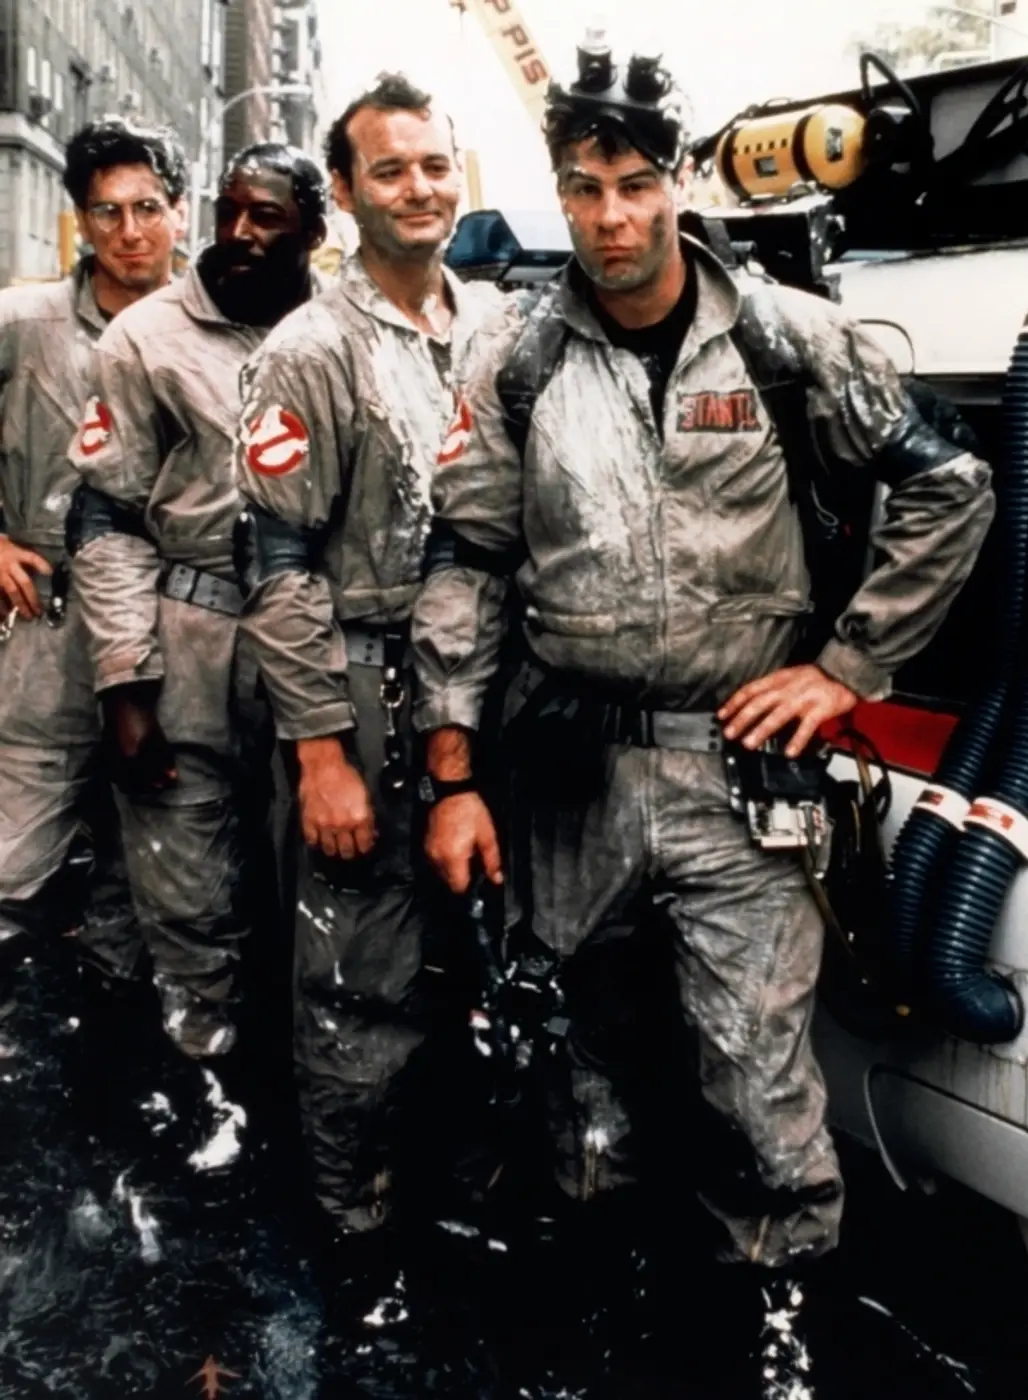 Dr. Raymond Stantz, Dr. Egon Spengler and Louis Tully in Ghostbusters